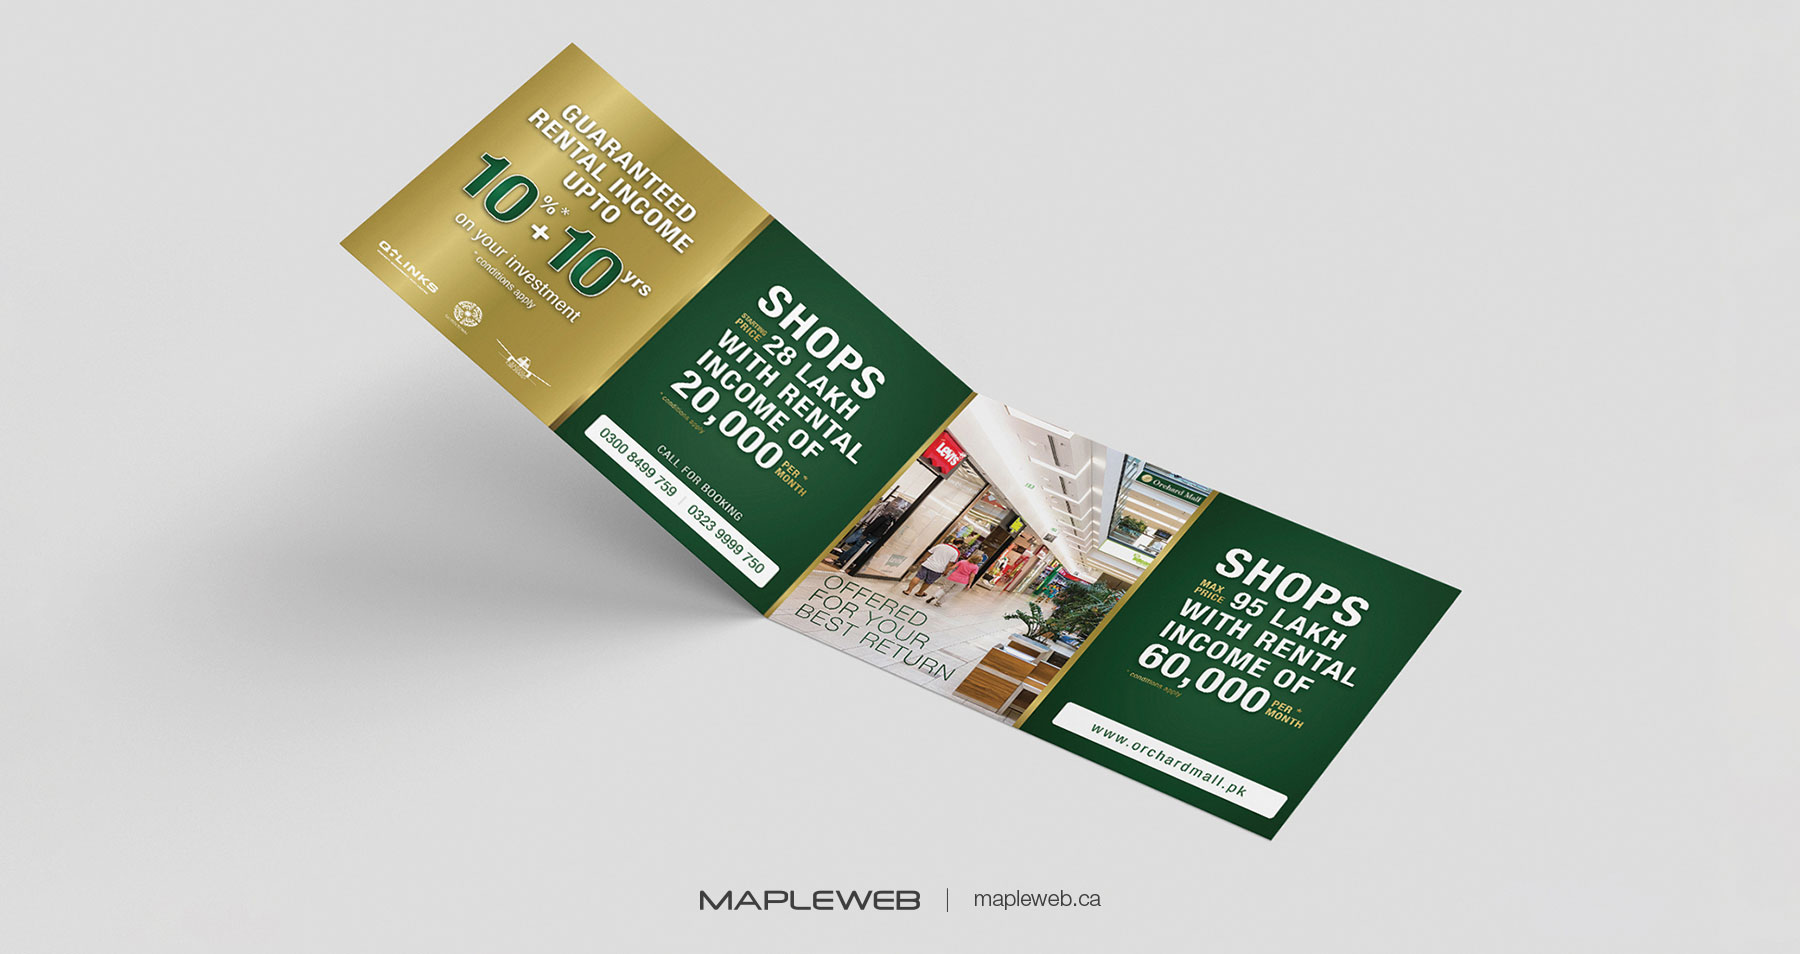 Orchard Mall Open Square Brochure Brand design by Mapleweb